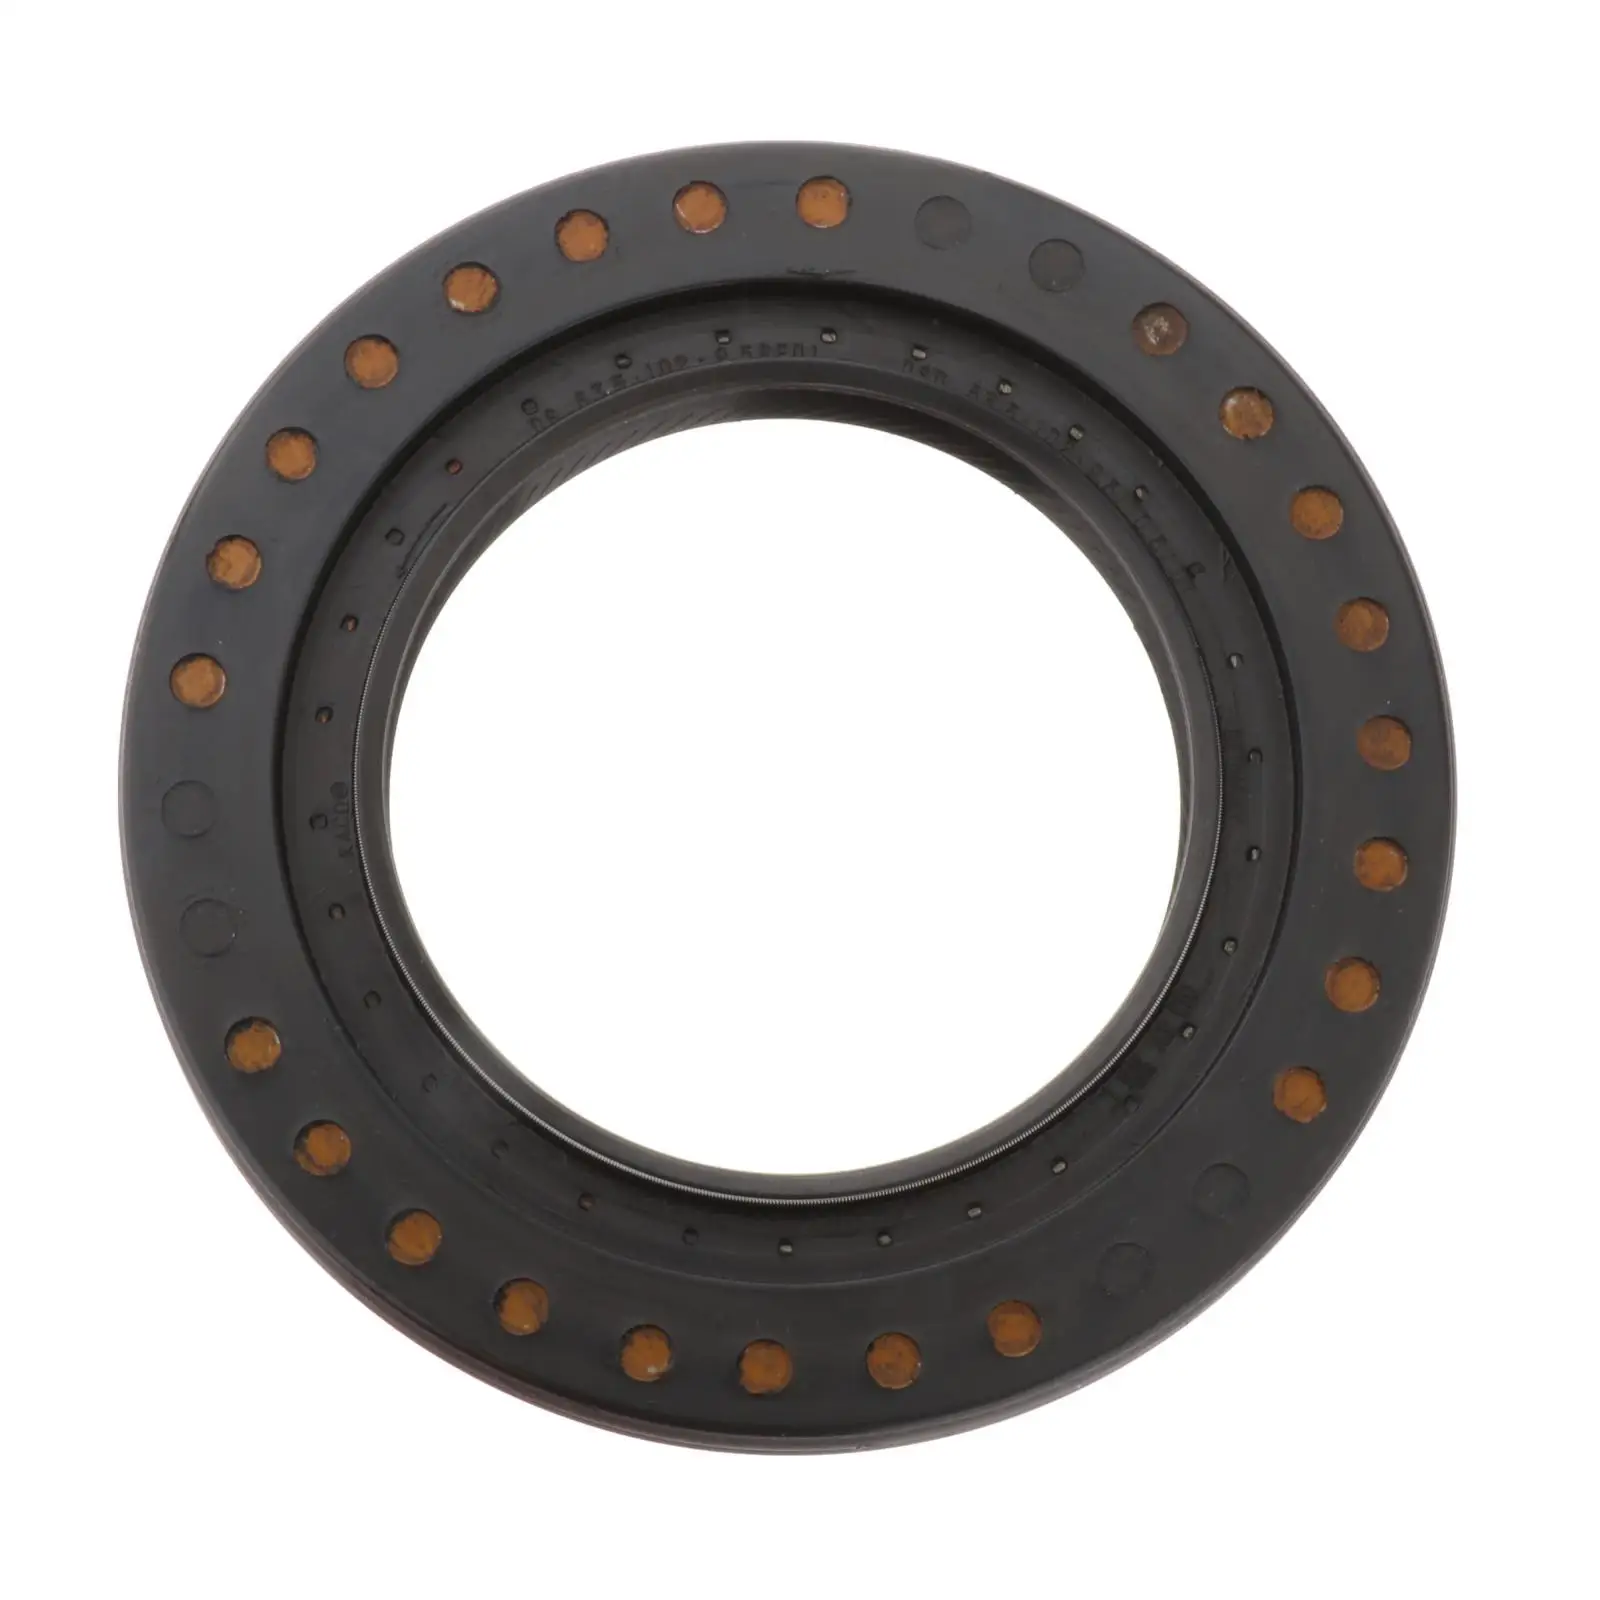 Half Shaft Oil Seal 275075A Double Side Angle Tooth Drive Shaft Oil Seal Fits for Audi A4 A6 A8 for 01T Transmission